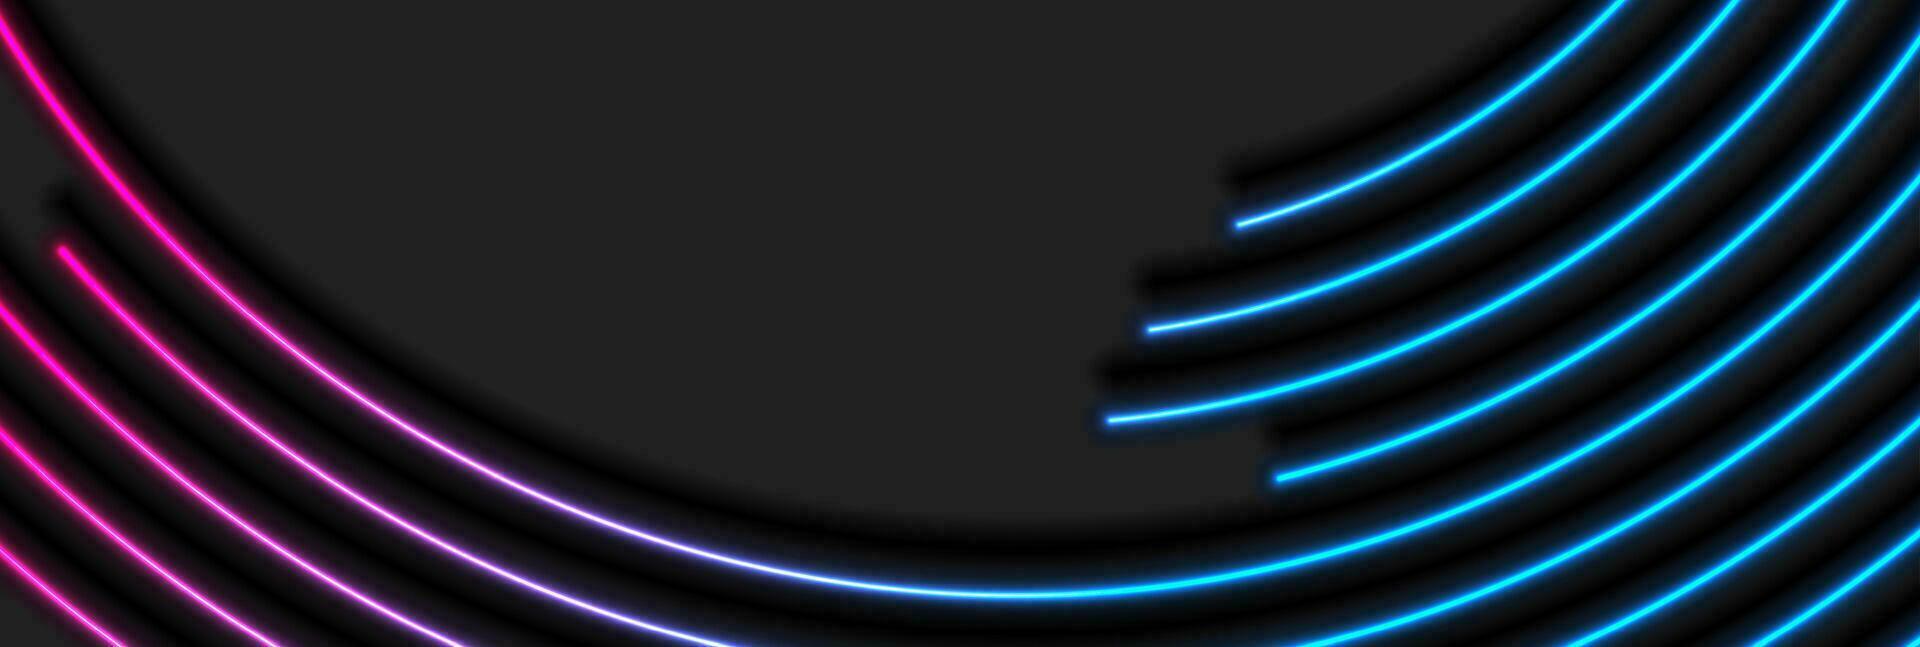 Abstract black technology banner with neon glowing lines vector